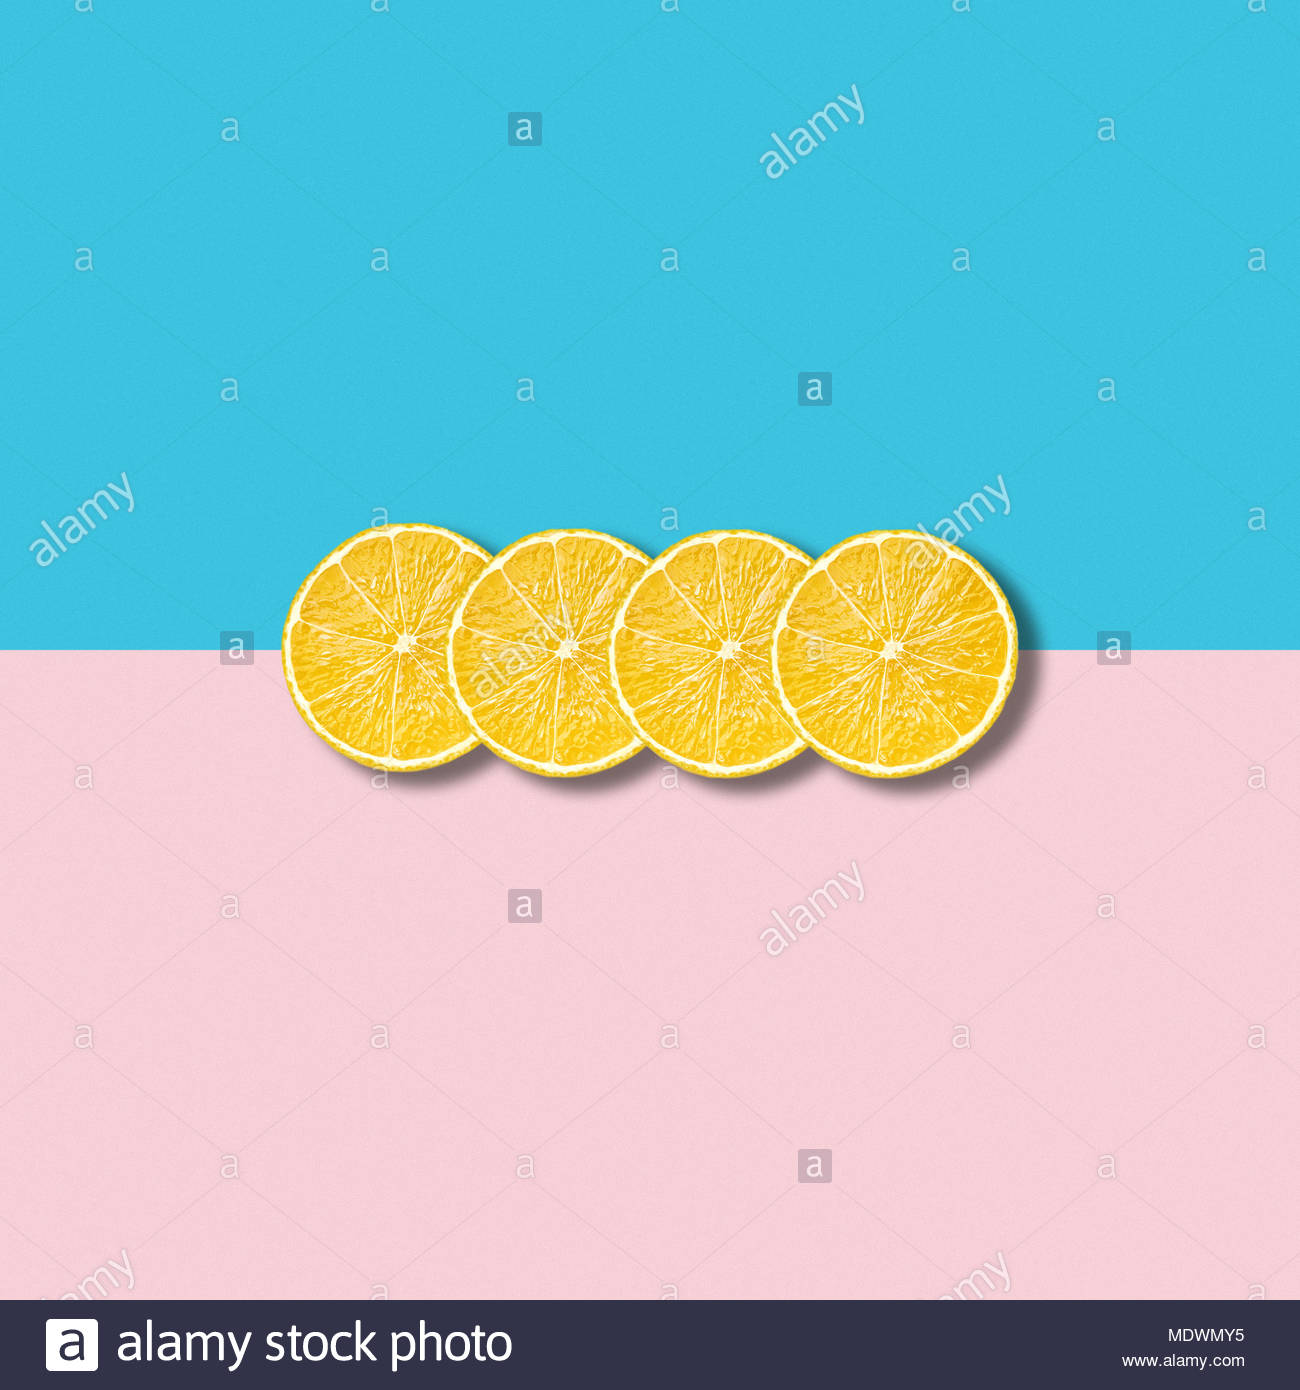 Minimal Abstract Illustration With Group Of Lemon Slices On Pastel